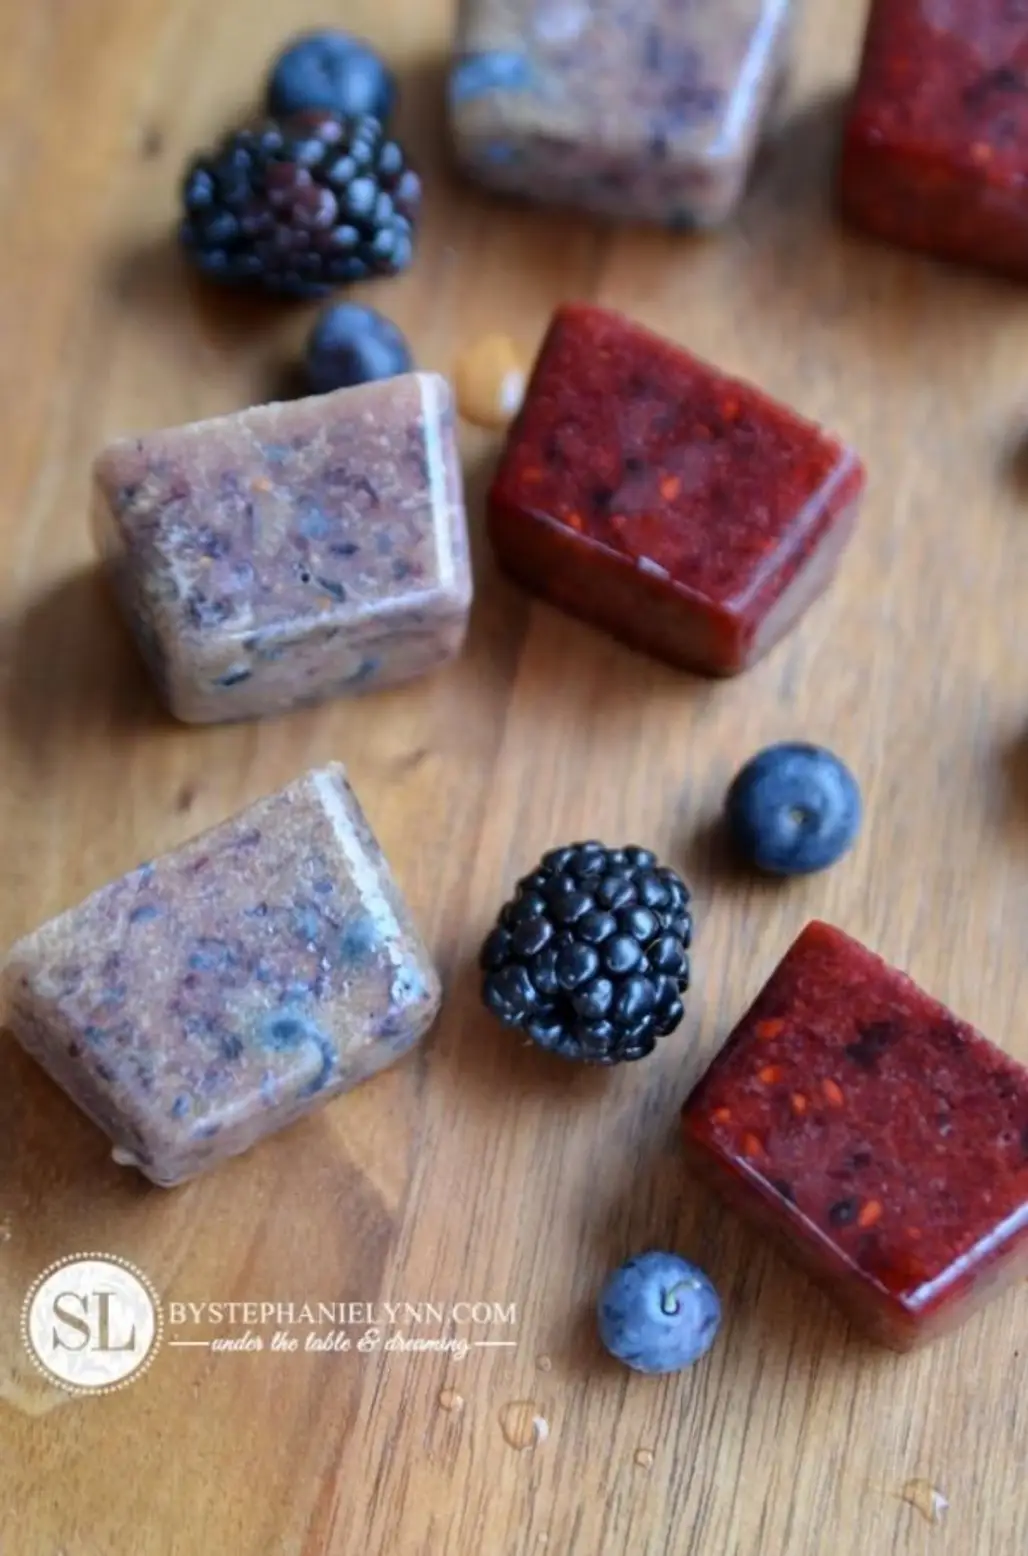 Blueberry and Blackberry Ice Cubes